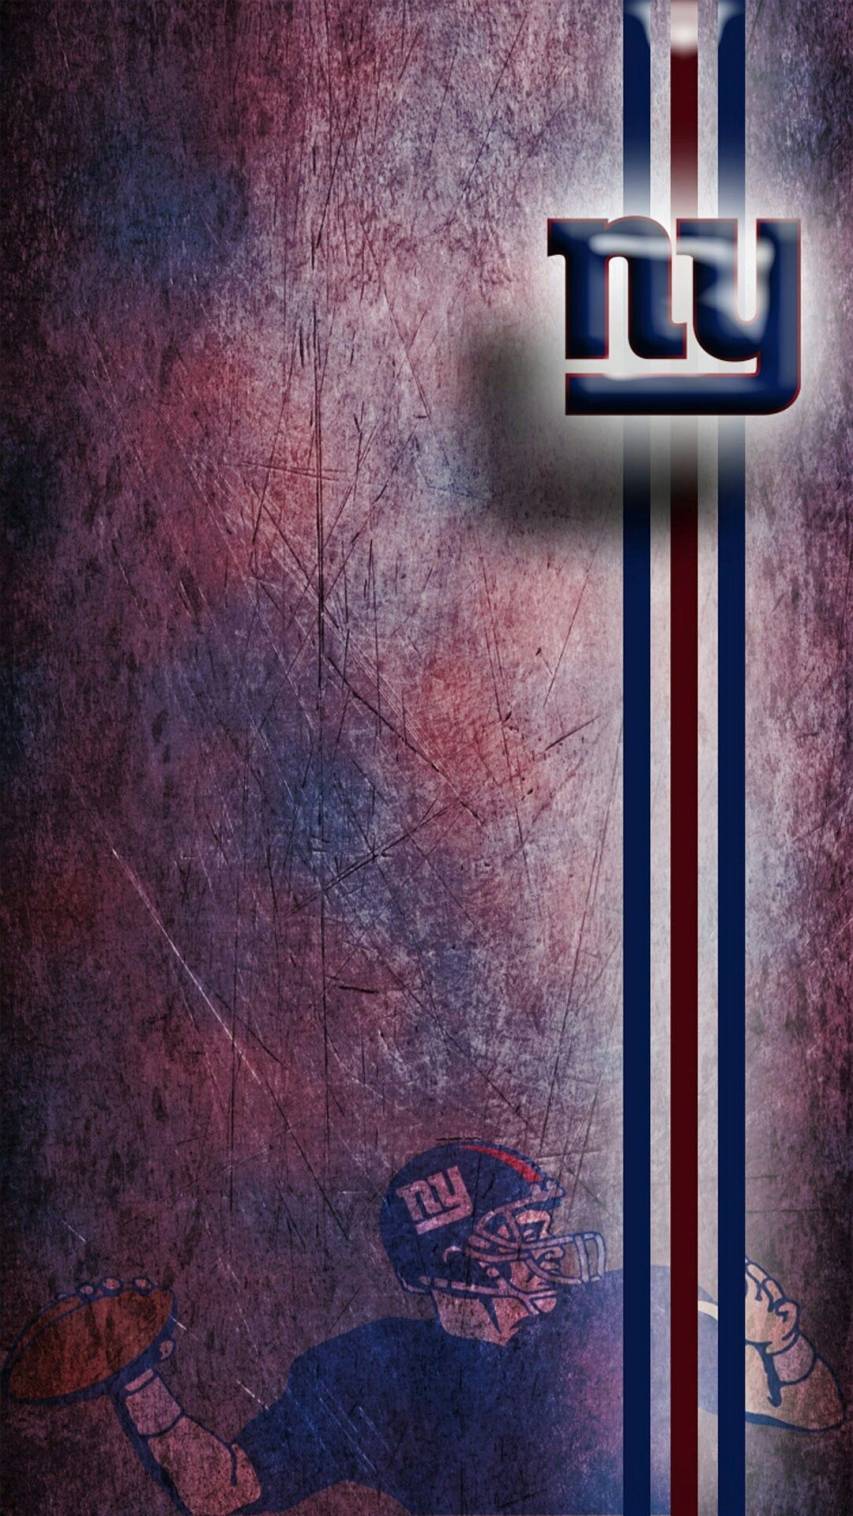 I found this season schedule wallpaper while searching for Giants wallpapers  iPhone 5 screen resolution  rNYGiants